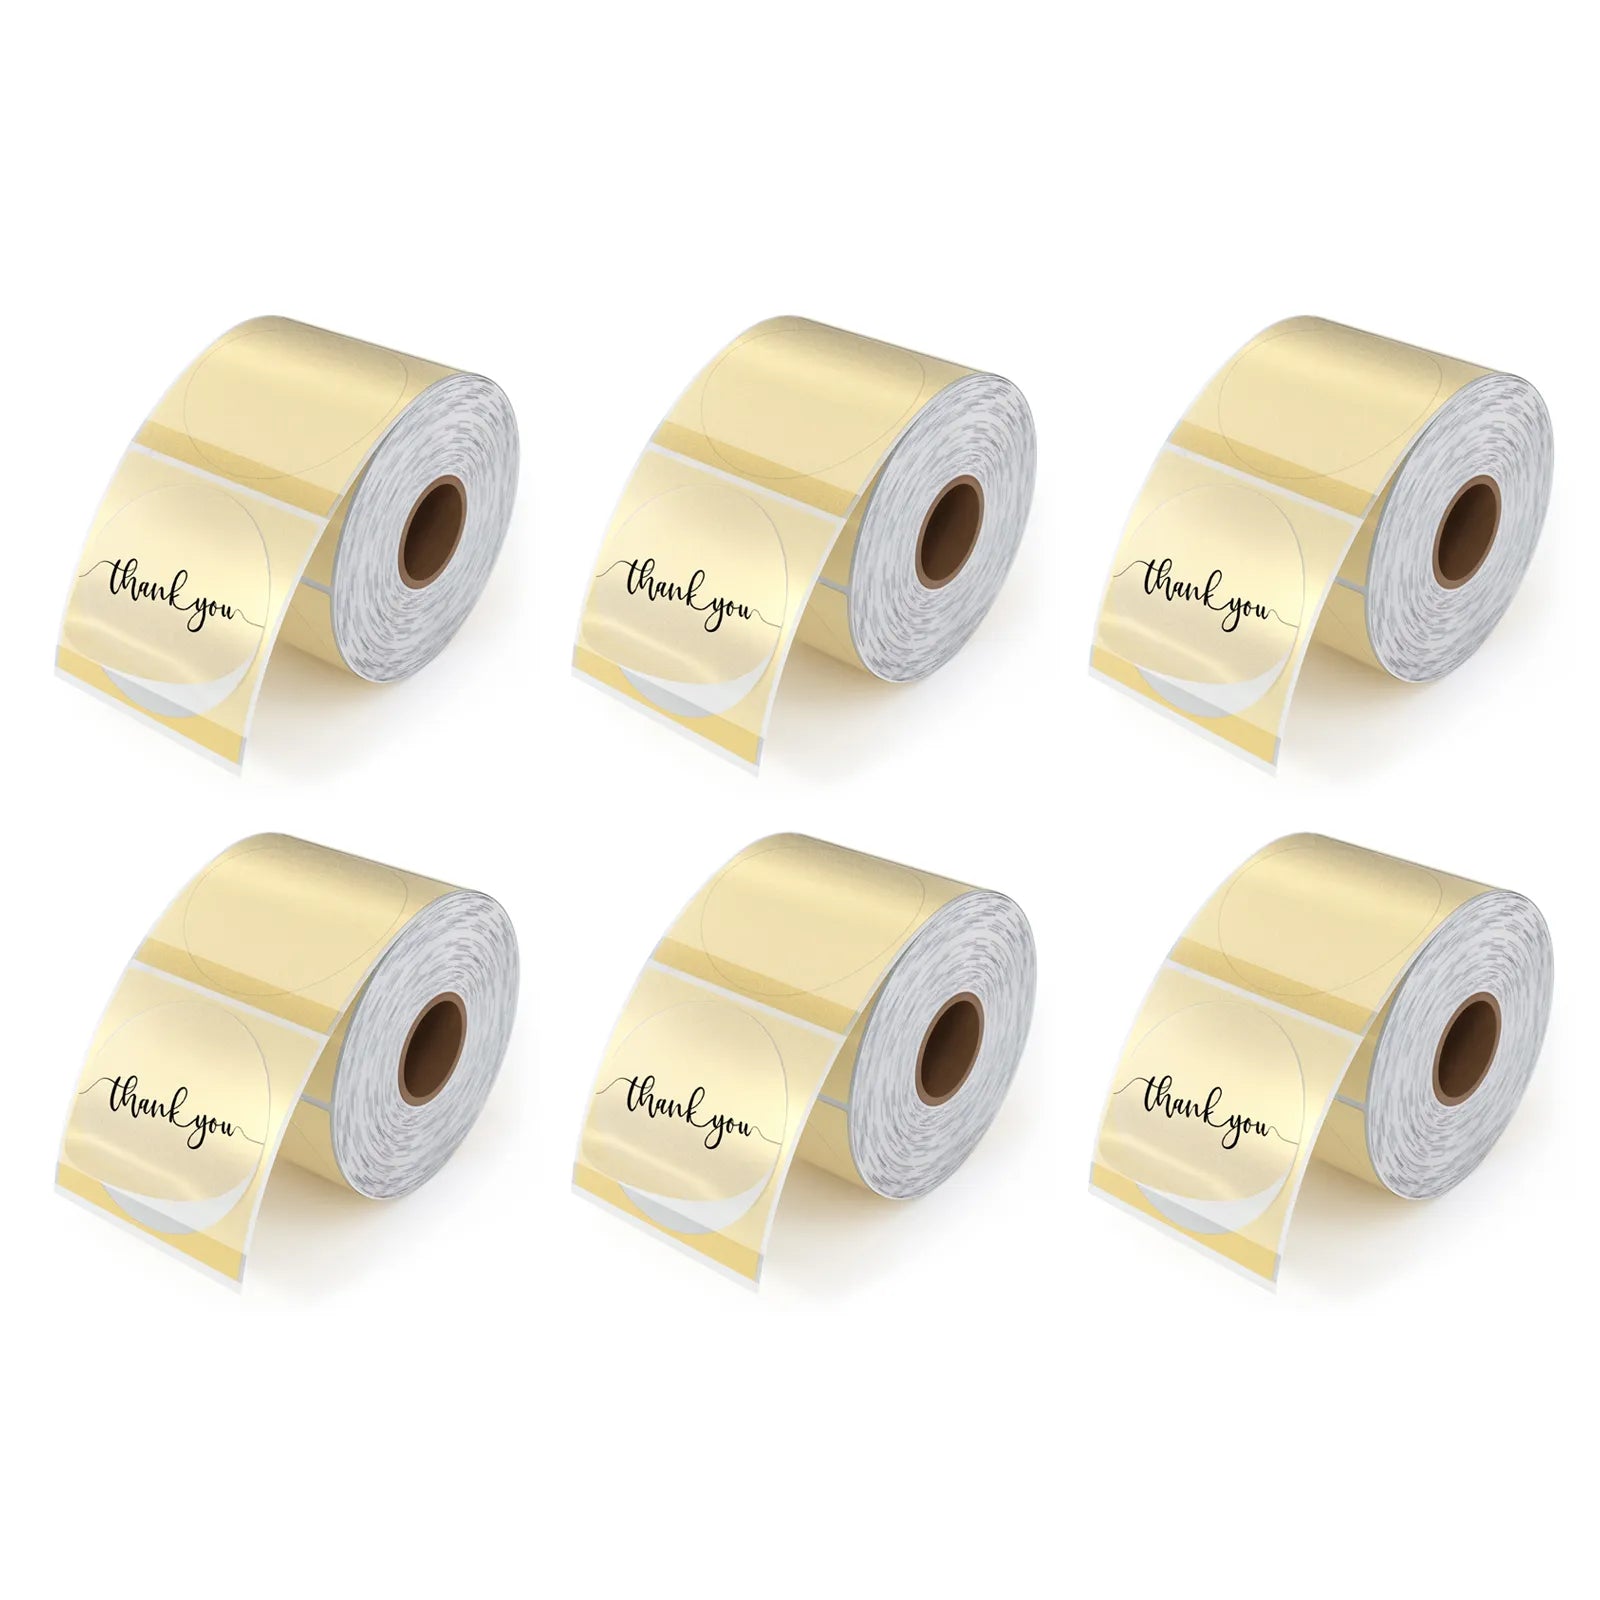 1 x 500 White Labeling Tape - Case of 3